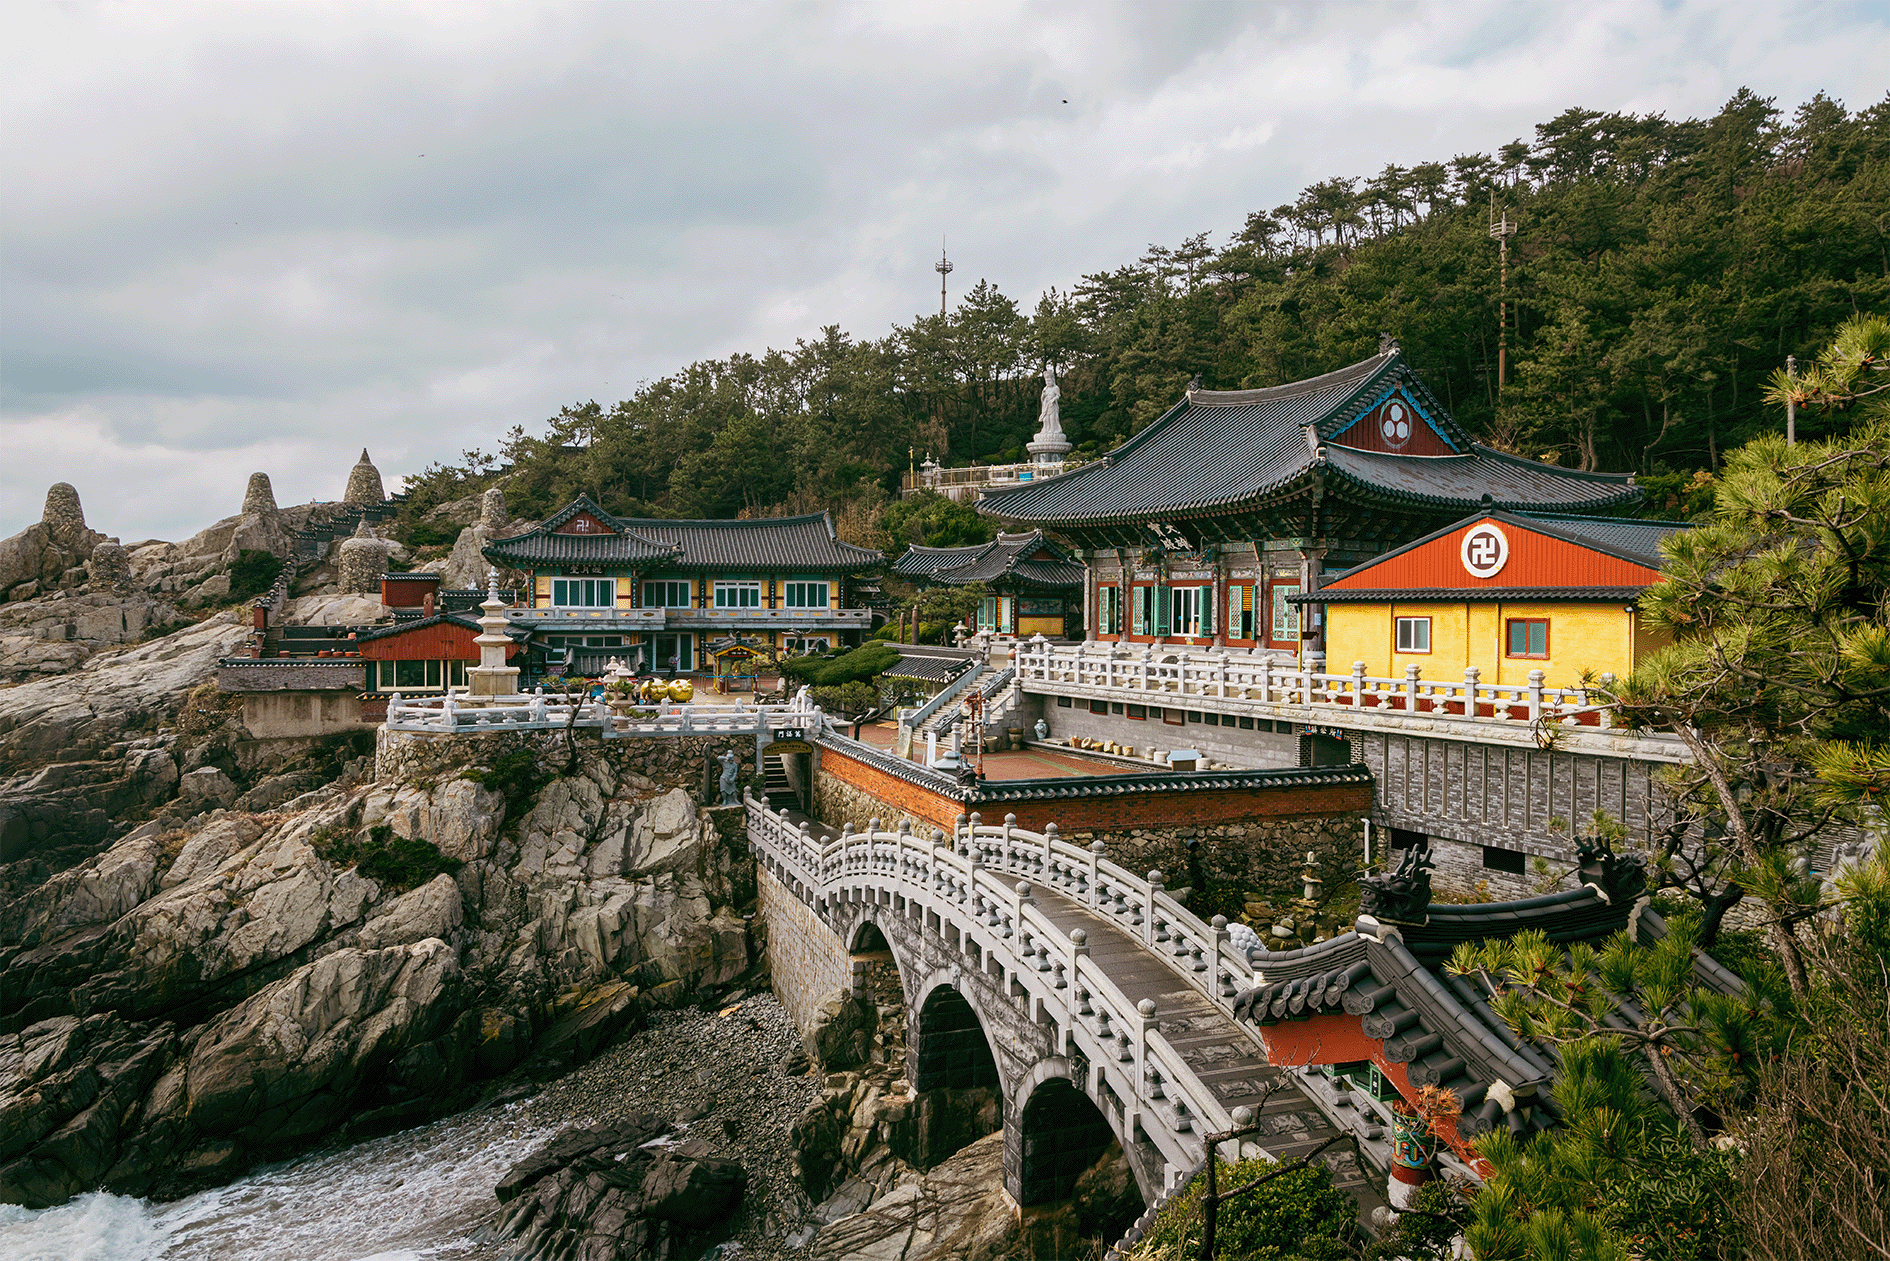 Traditional temple by the sea with connecting arched bridges and rocky landscape